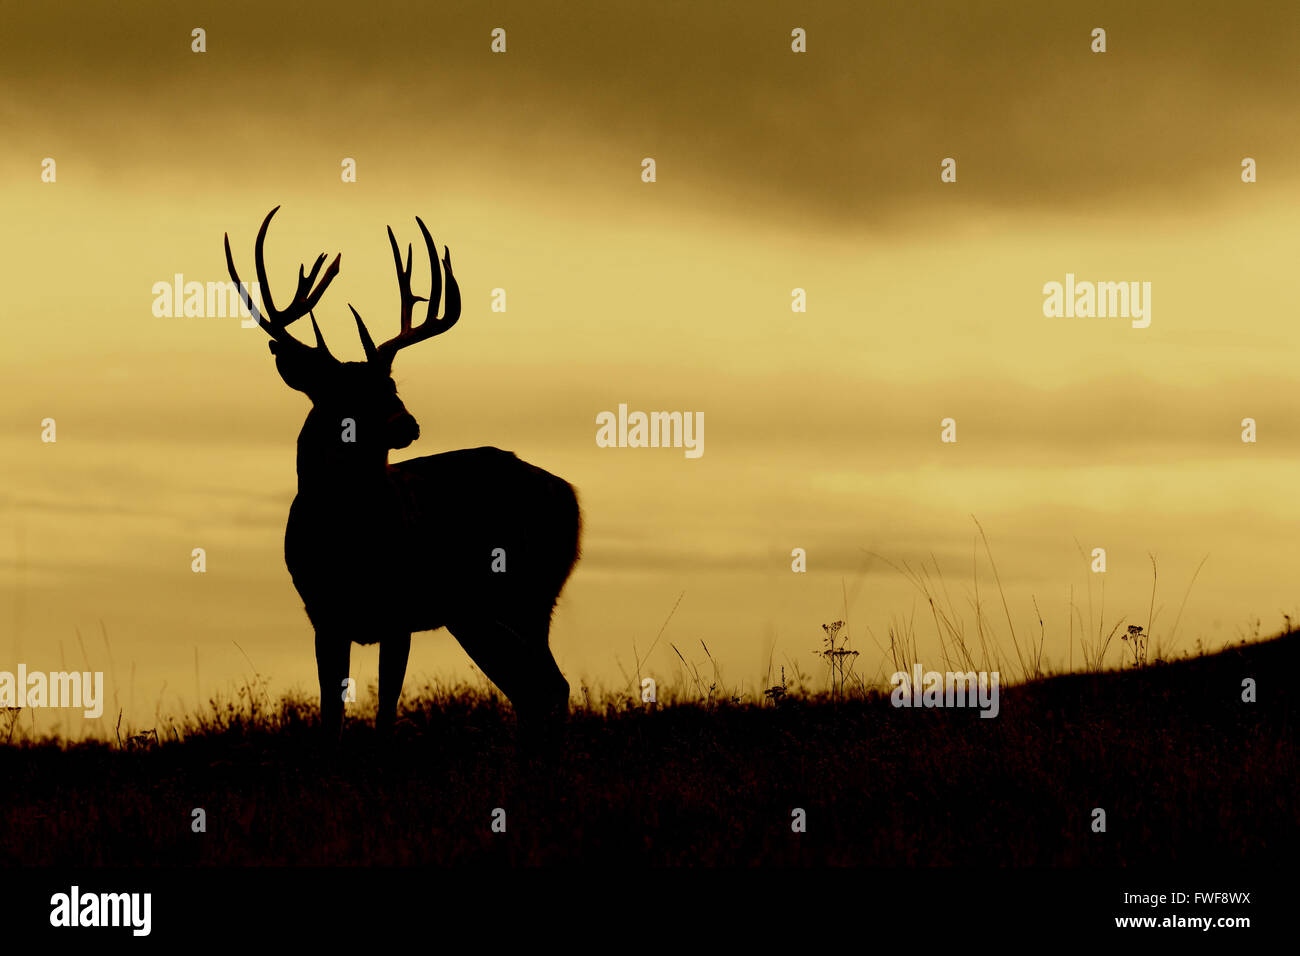 Whitetail Deer buck with large antlers standing against a beautiful sky with layered clouds Stock Photo